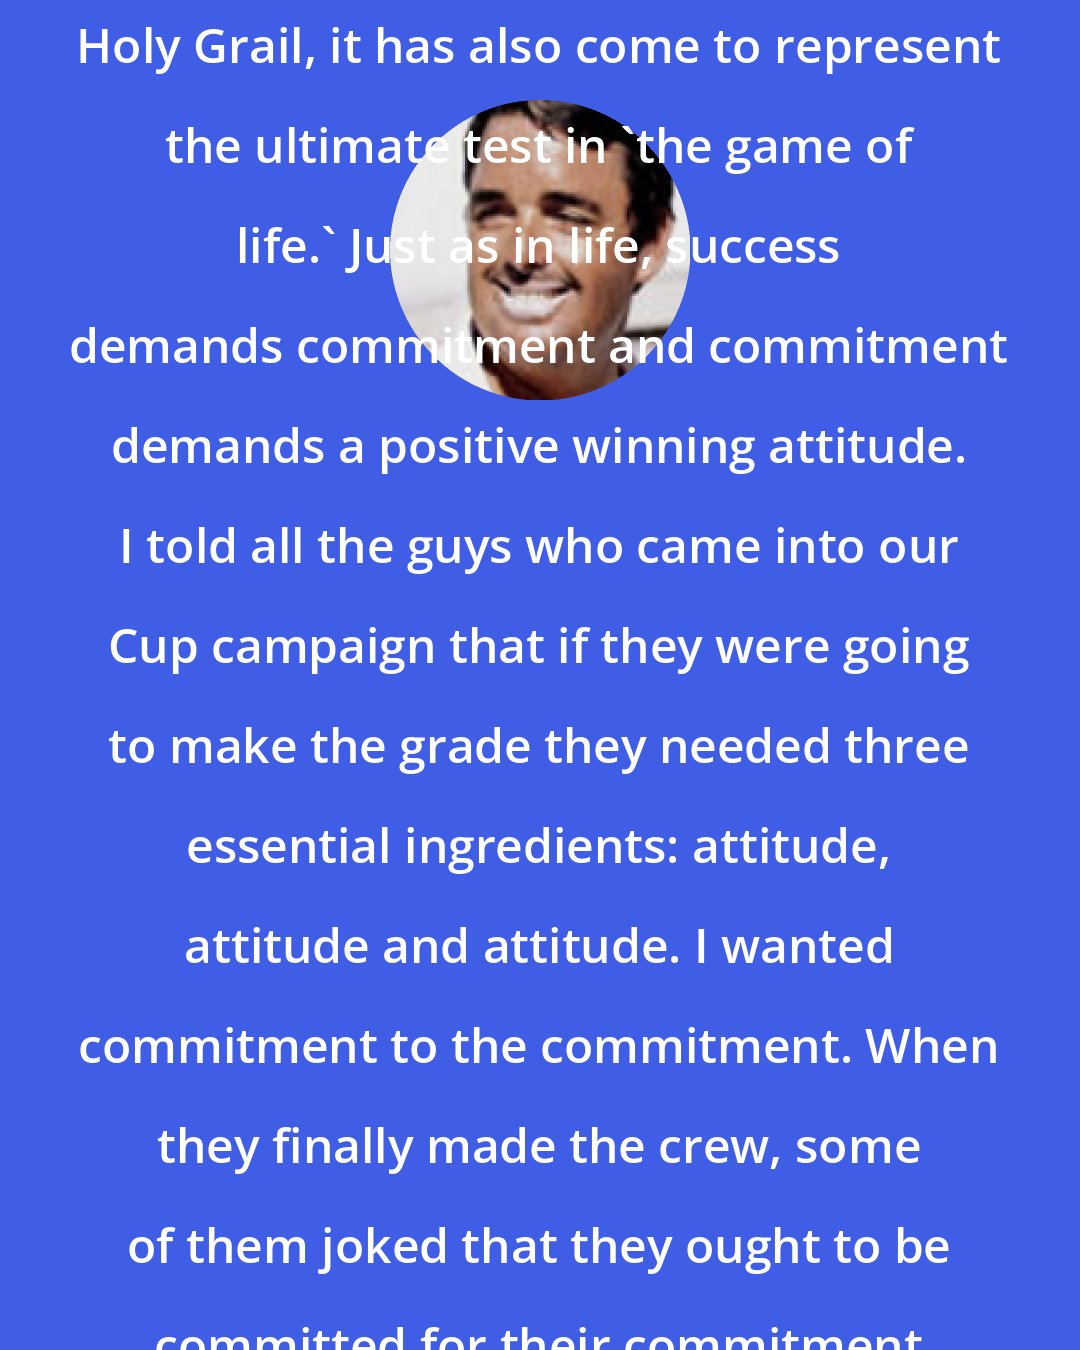 Dennis Conner: While the (America's) Cup is yachting's Holy Grail, it has also come to represent the ultimate test in 'the game of life.' Just as in life, success demands commitment and commitment demands a positive winning attitude. I told all the guys who came into our Cup campaign that if they were going to make the grade they needed three essential ingredients: attitude, attitude and attitude. I wanted commitment to the commitment. When they finally made the crew, some of them joked that they ought to be committed for their commitment to the commitment.